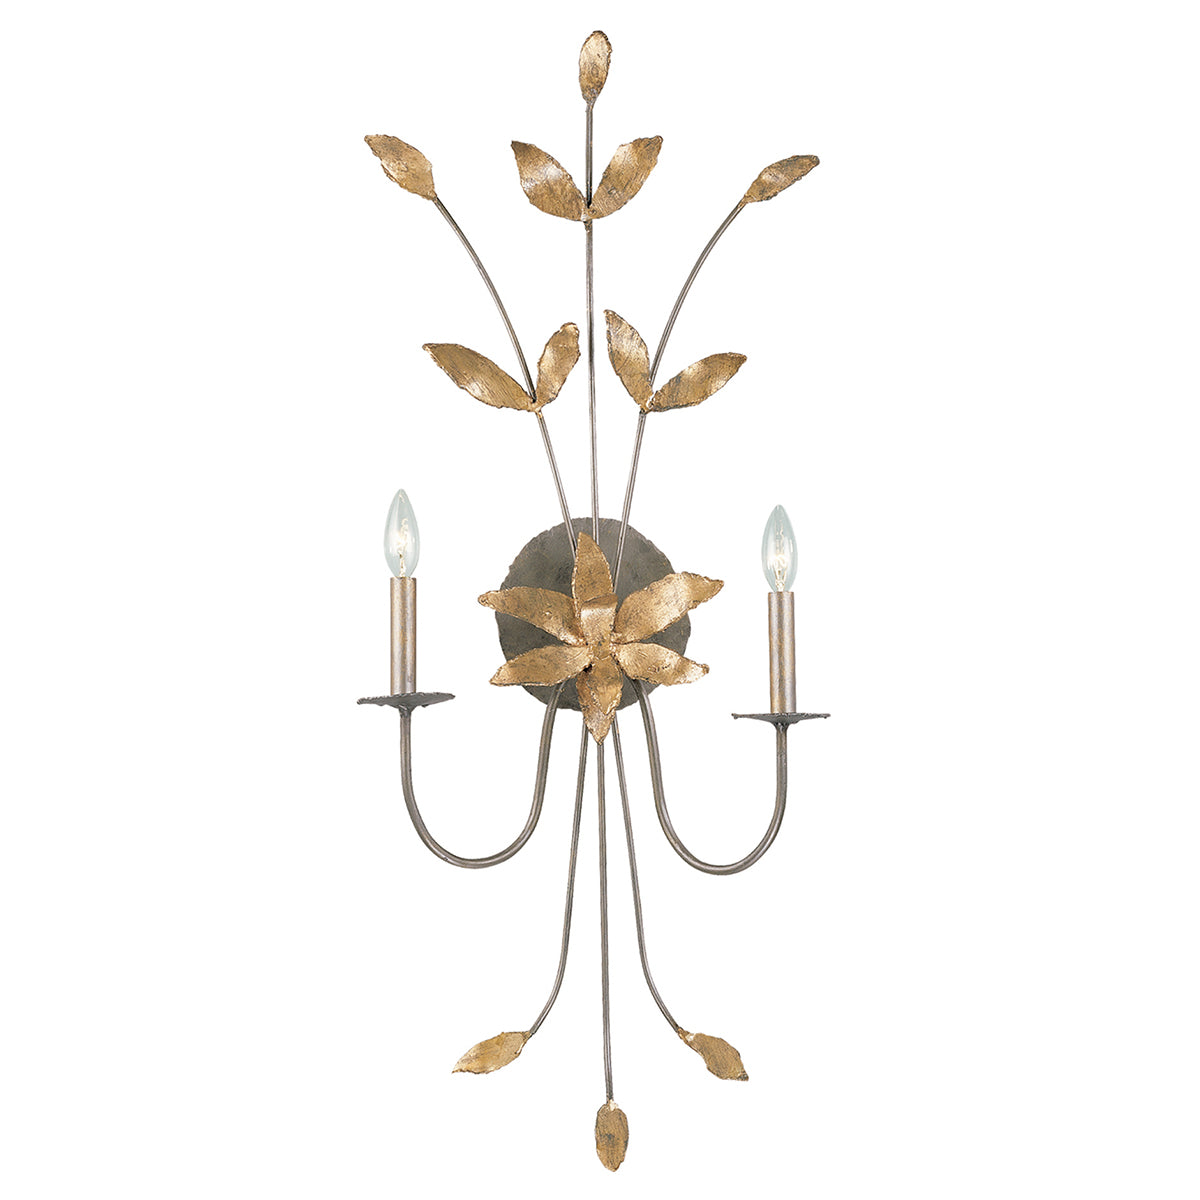 Lucas + McKearn - SC1148-2 - Two Light Wall Sconce - Simone - Silver w/Gold Leaf Blossom